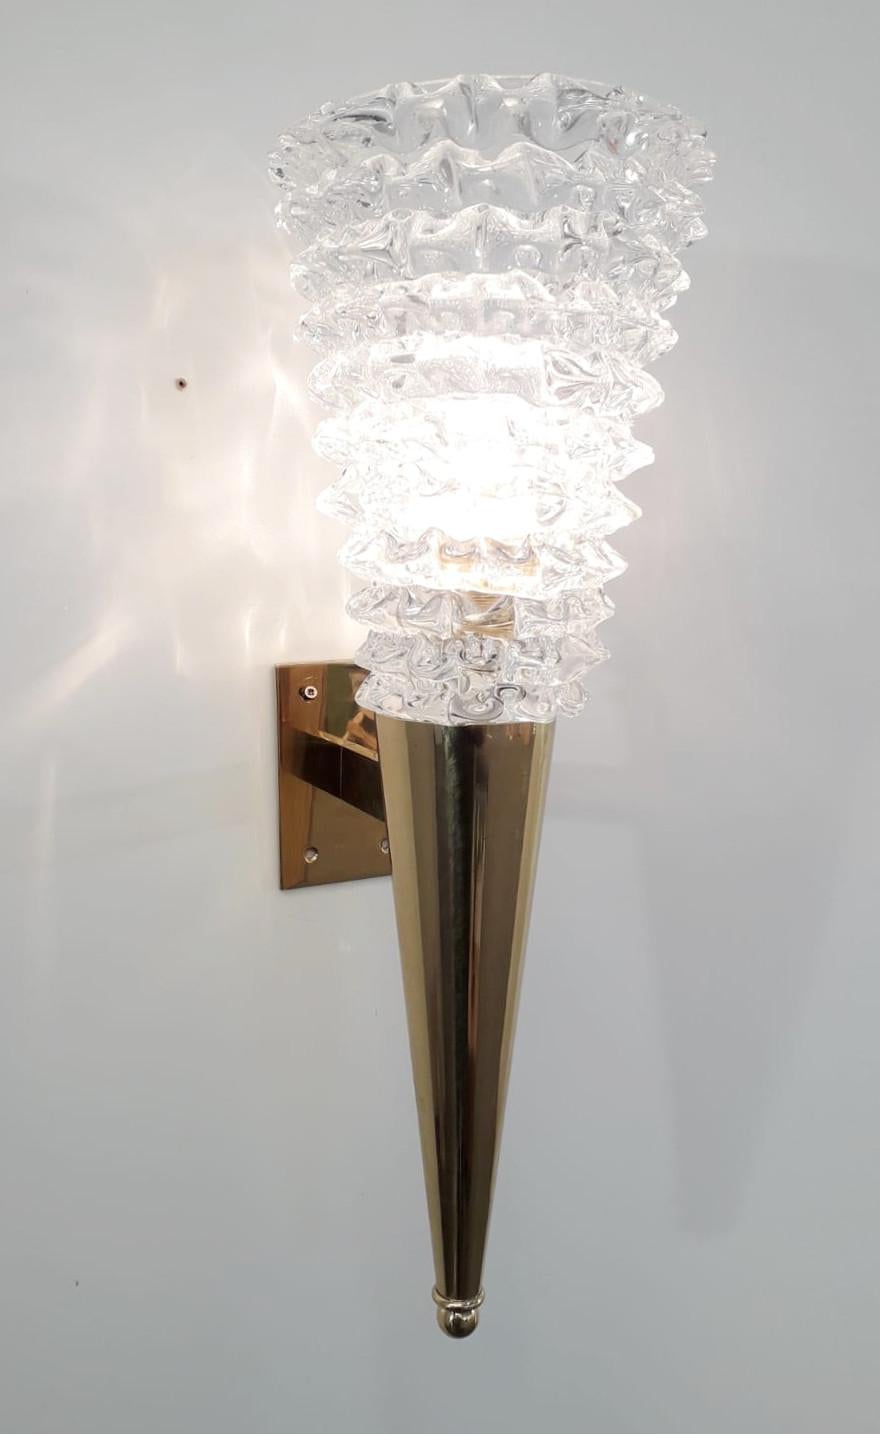 Italian torchere wall light with clear Murano glass hand blown to create a beaked textured effect using Rostrato technique, mounted on polished brass frame / Designed by Barovier e Toso, circa 1960s with original Barovier e Toso maker's mark on the